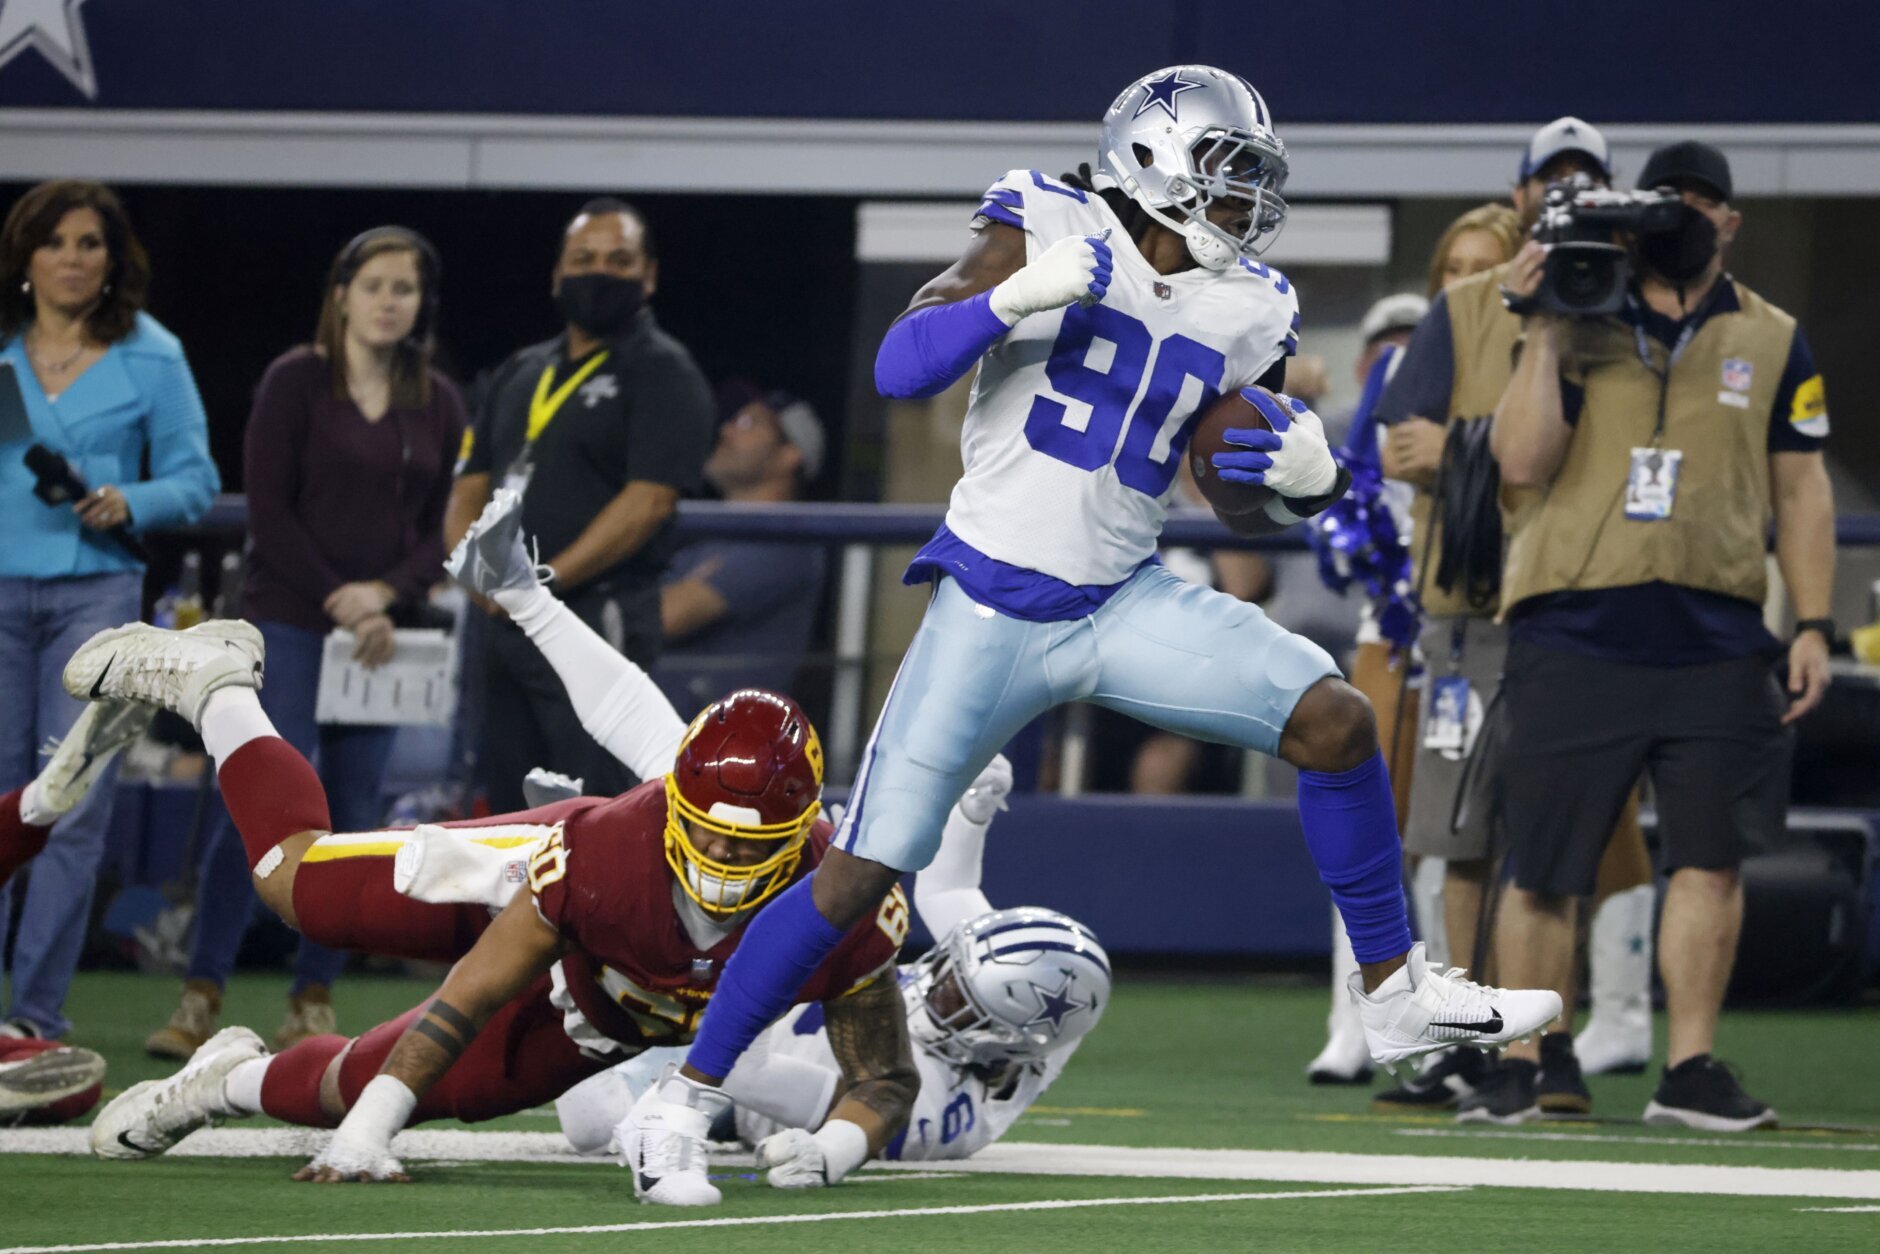 <p><em><strong>Washington 14</strong></em><br />
<em><strong>Cowboys 56</strong></em></p>
<p>Dallas had offensive and defensive linemen score touchdowns, Dak Prescott threw for 321 yards and four touchdowns <em>before halftime</em> <a href="https://twitter.com/ESPNStatsInfo/status/1475316229023875084?s=20" target="_blank" rel="noopener">to make some weird history</a> and <a href="https://wtop.com/washington-football/2021/12/jonathan-allen-and-daron-payne-get-into-sideline-scuffle-in-dallas/" target="_blank" rel="noopener">Washington&#8217;s defense had more fights among themselves on the sideline</a> than they did on the field with their season on the line against a division rival. Football season is effectively over in D.C.</p>
